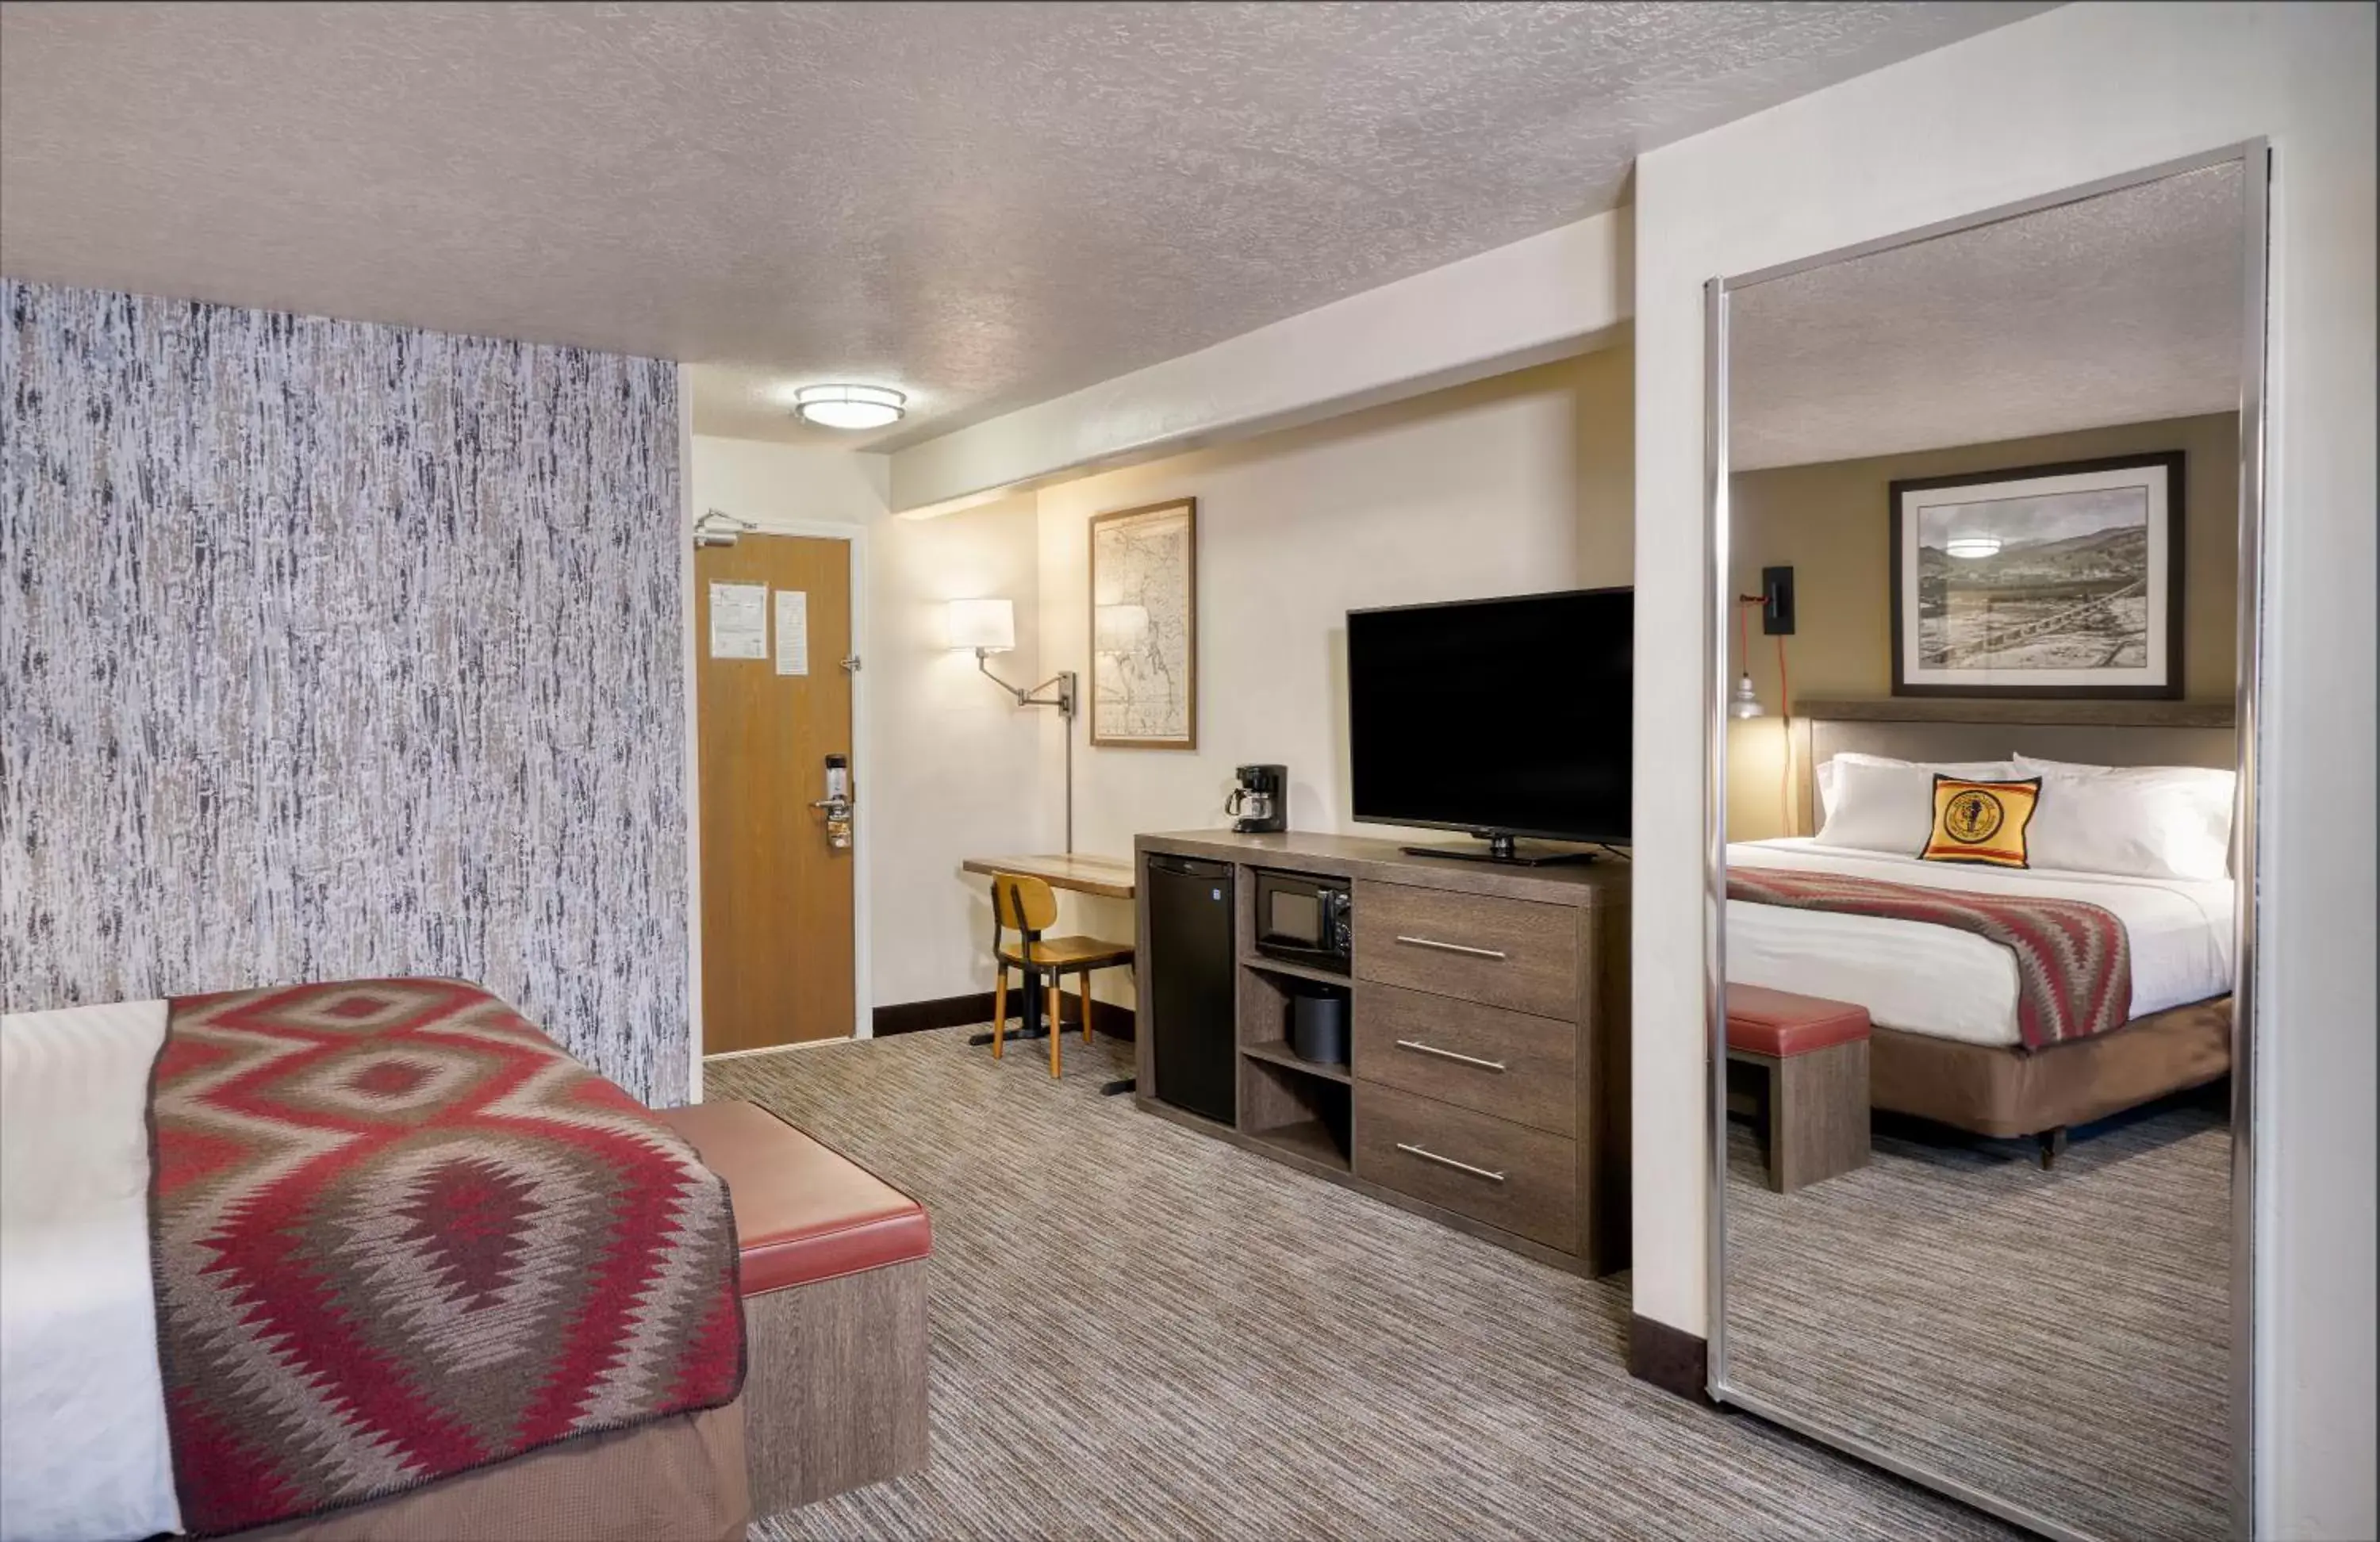 Bedroom, TV/Entertainment Center in Yellowstone Park Hotel